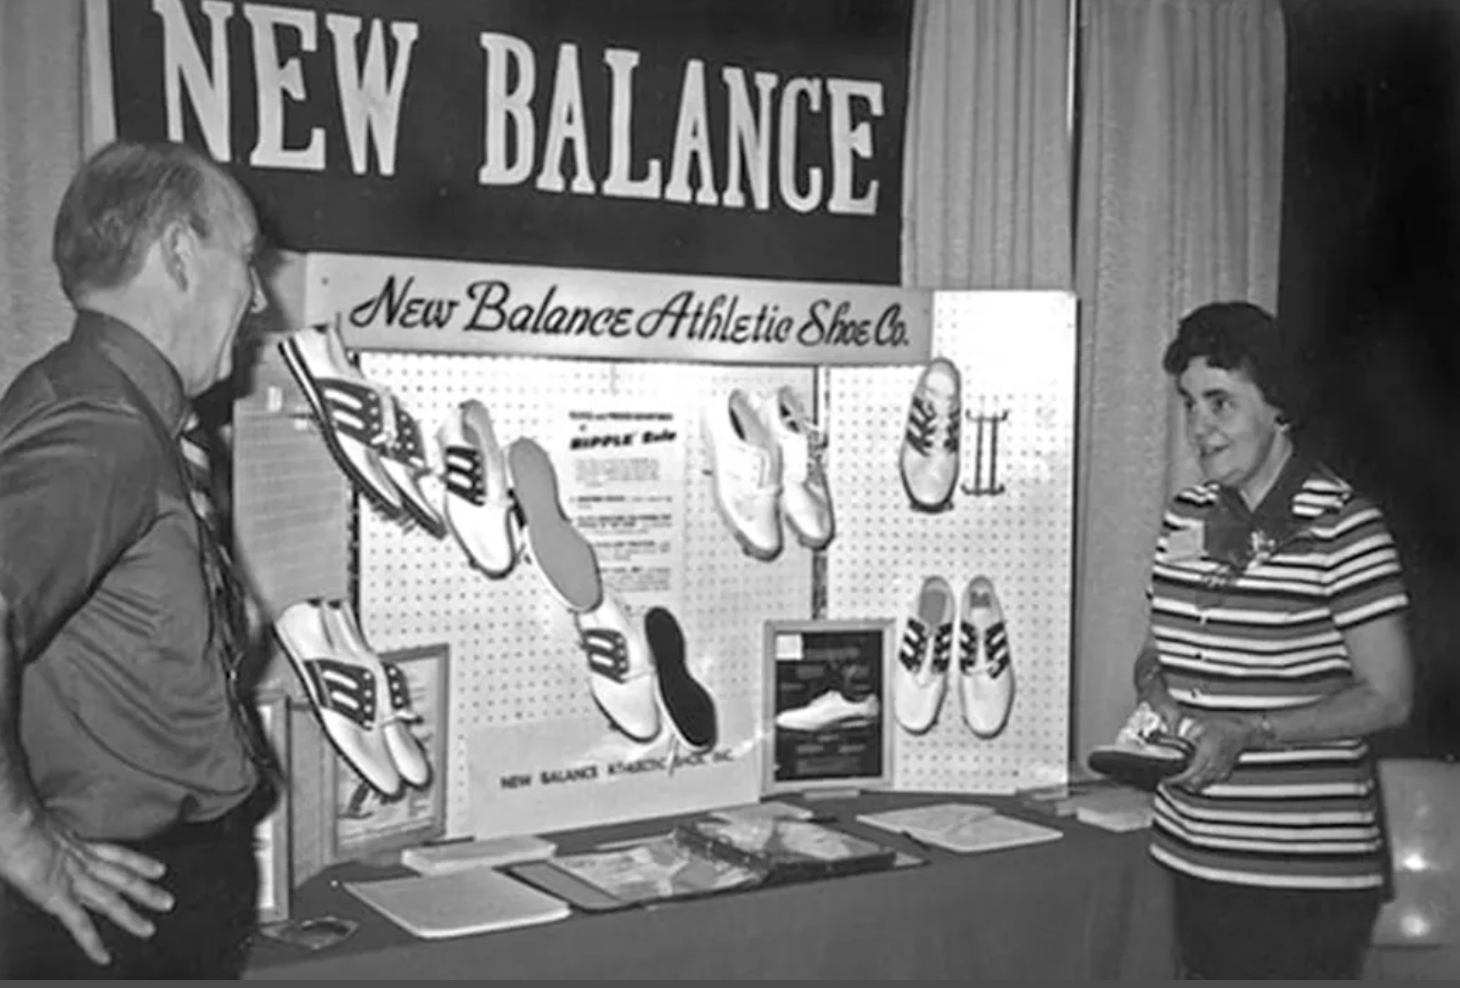 About the creation of the New Balance icon